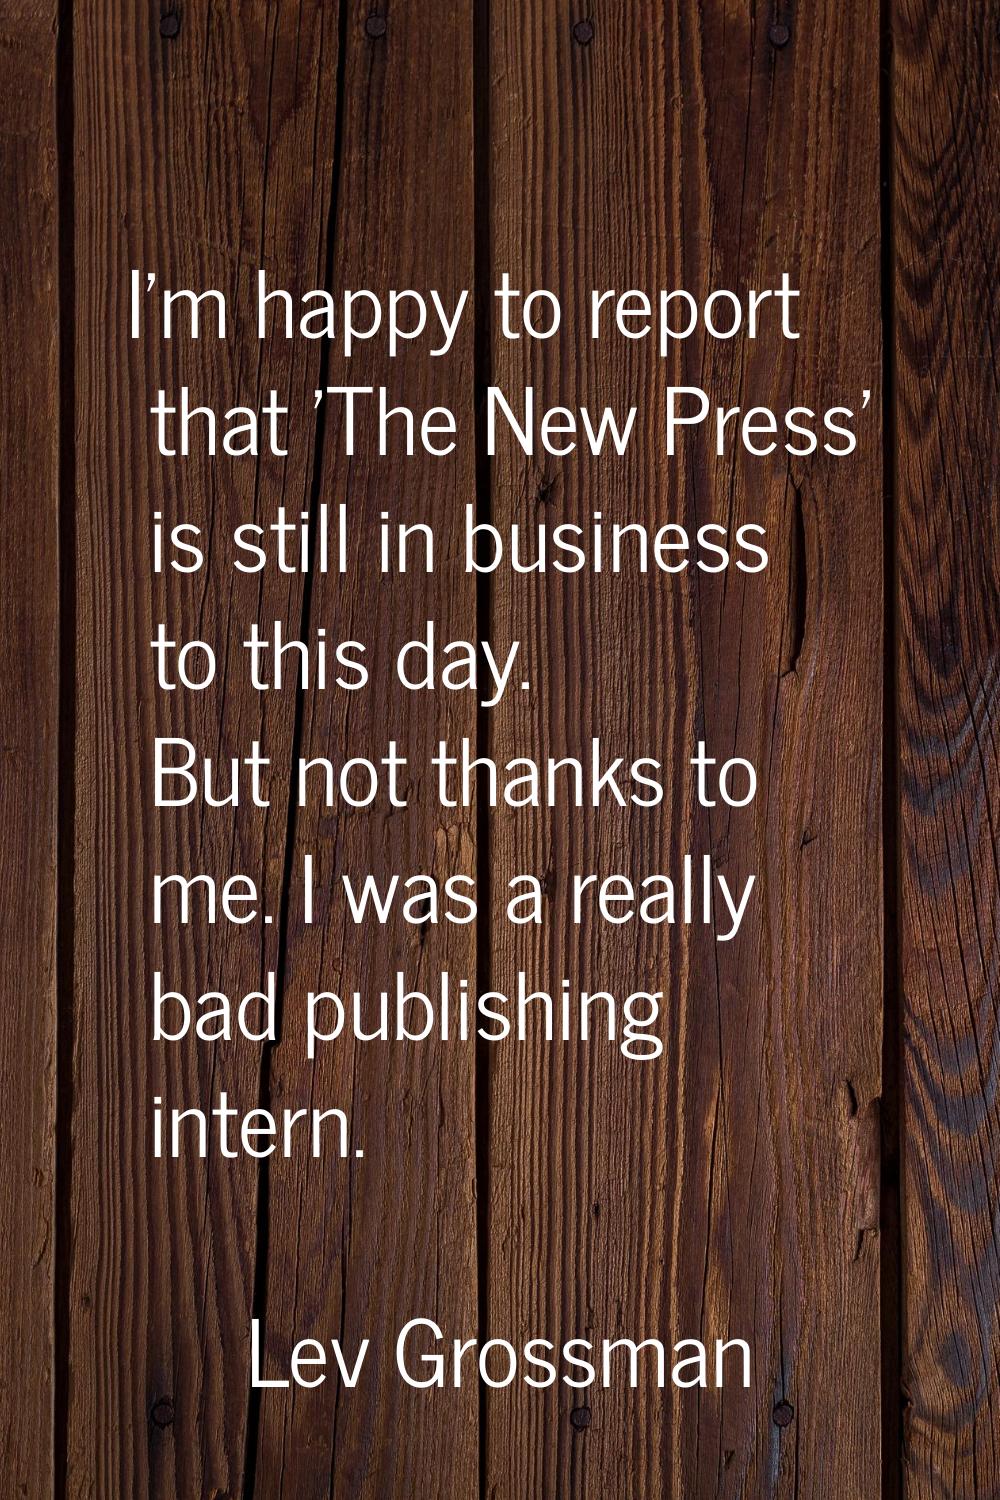 I'm happy to report that 'The New Press' is still in business to this day. But not thanks to me. I 